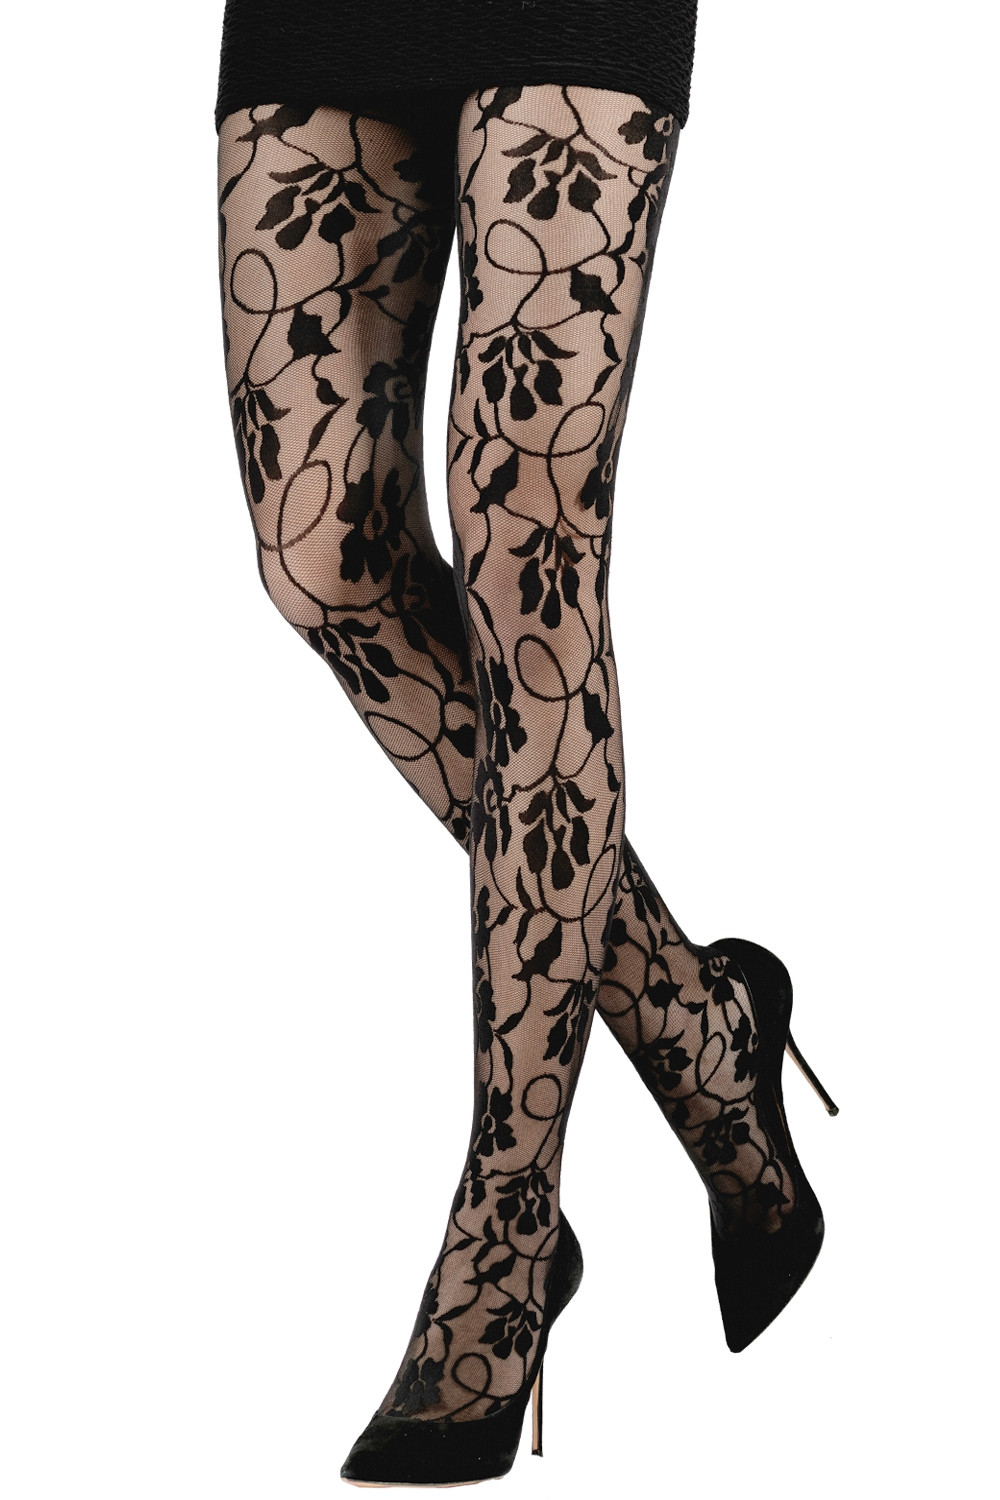 Contemporary Lace Tights, Tights & Hosiery, Women